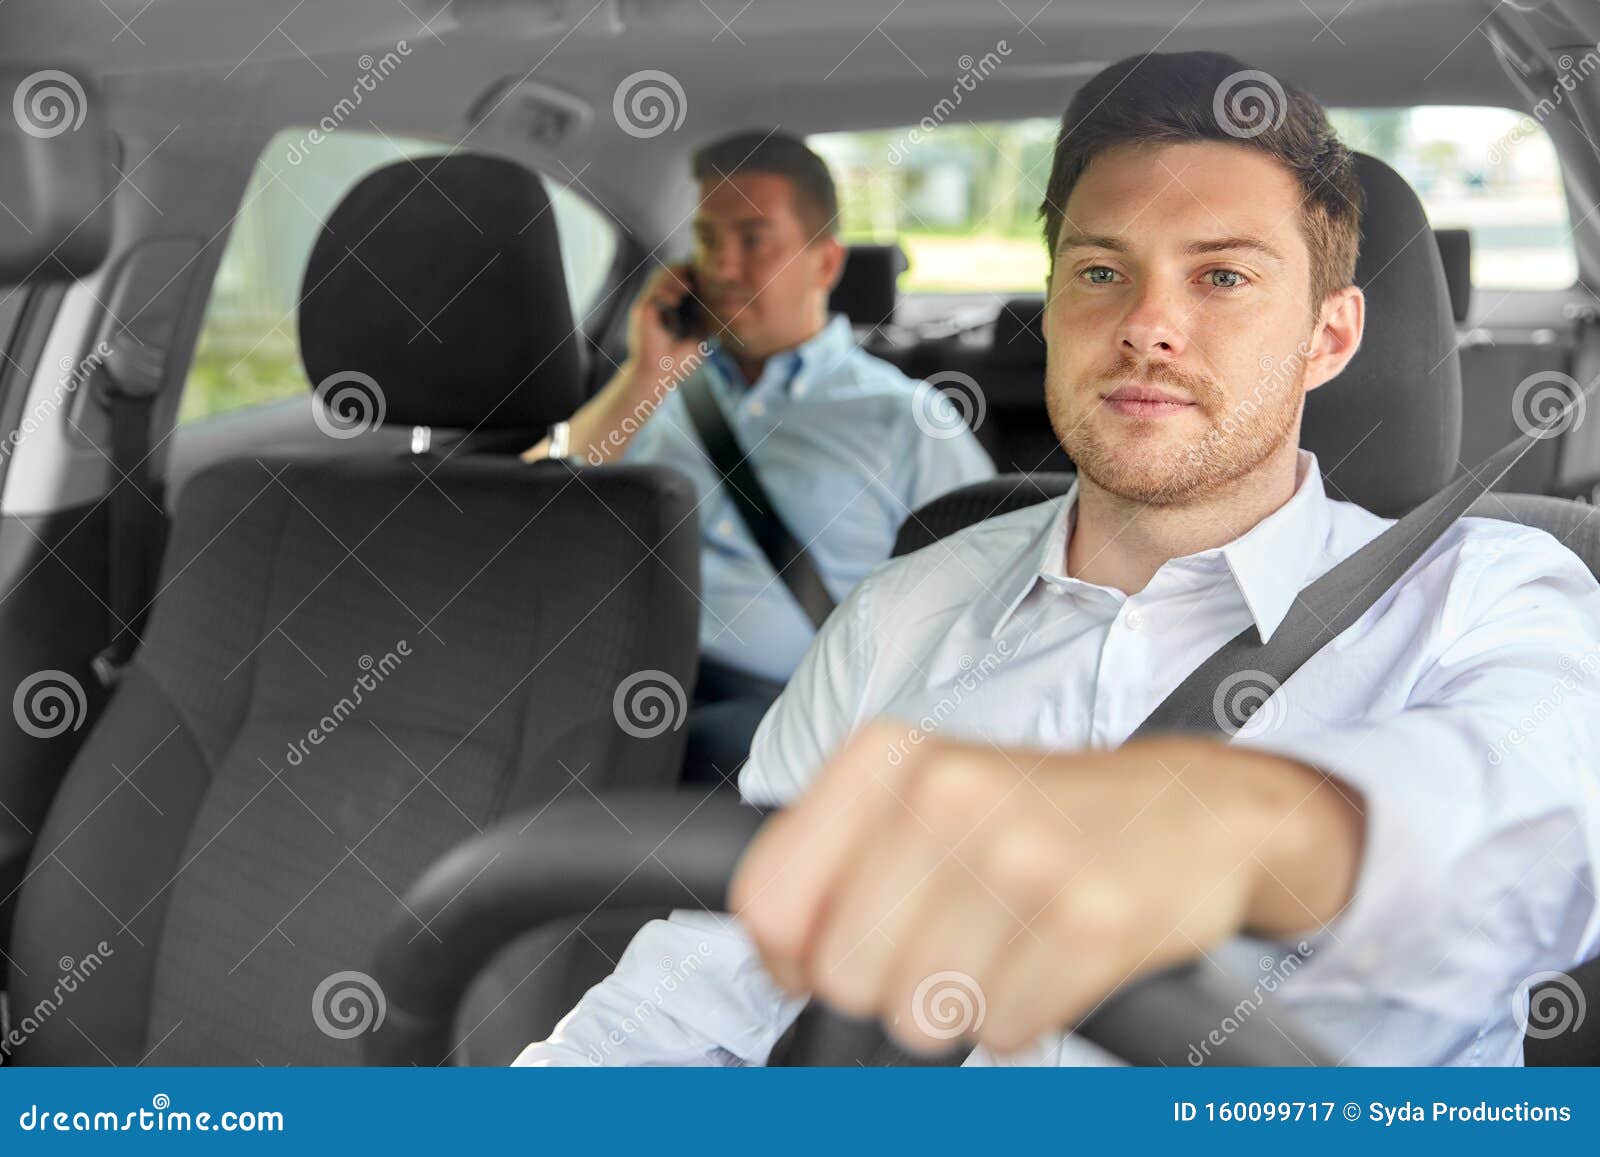 male taxi driver driving car with passenger